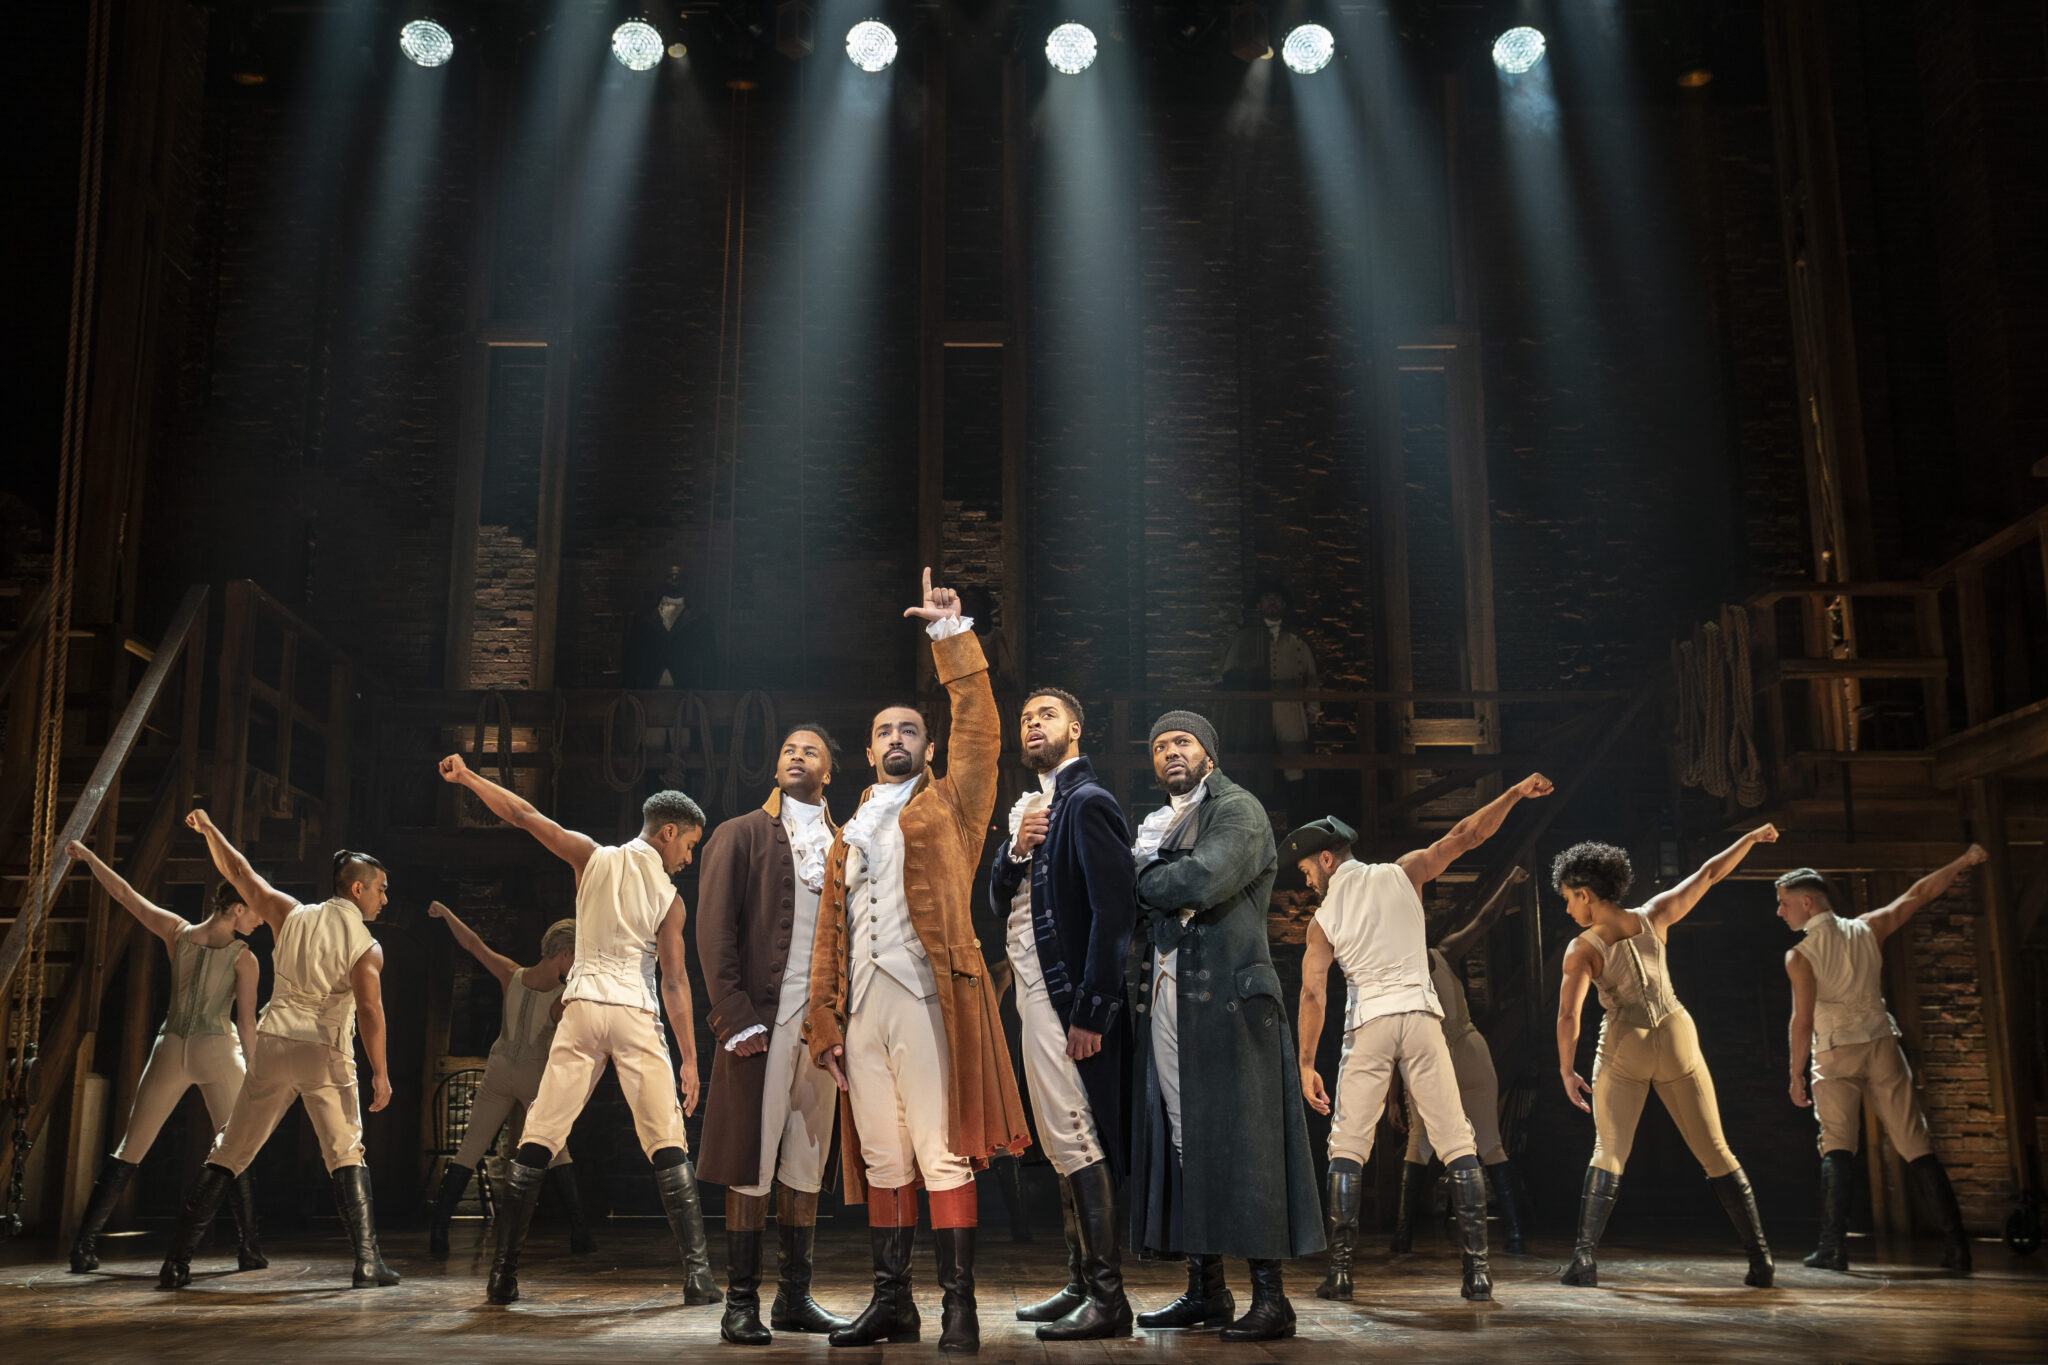 HAMILTON Musical at Fox Theater Review MARQUEE BY MARQUIS